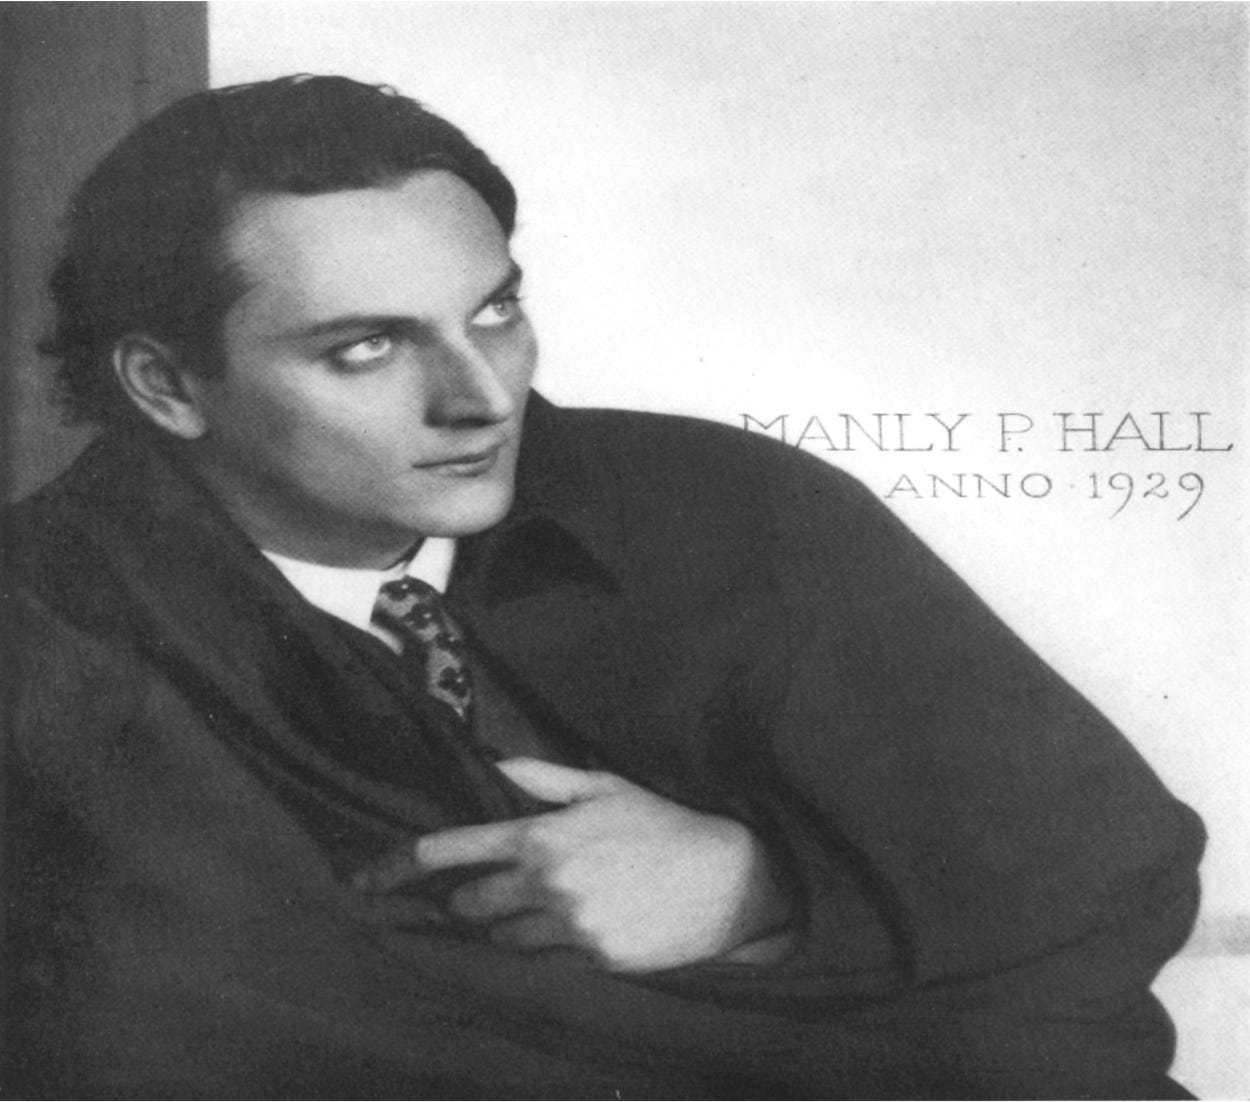 taille-manly-palmer-hall-Image